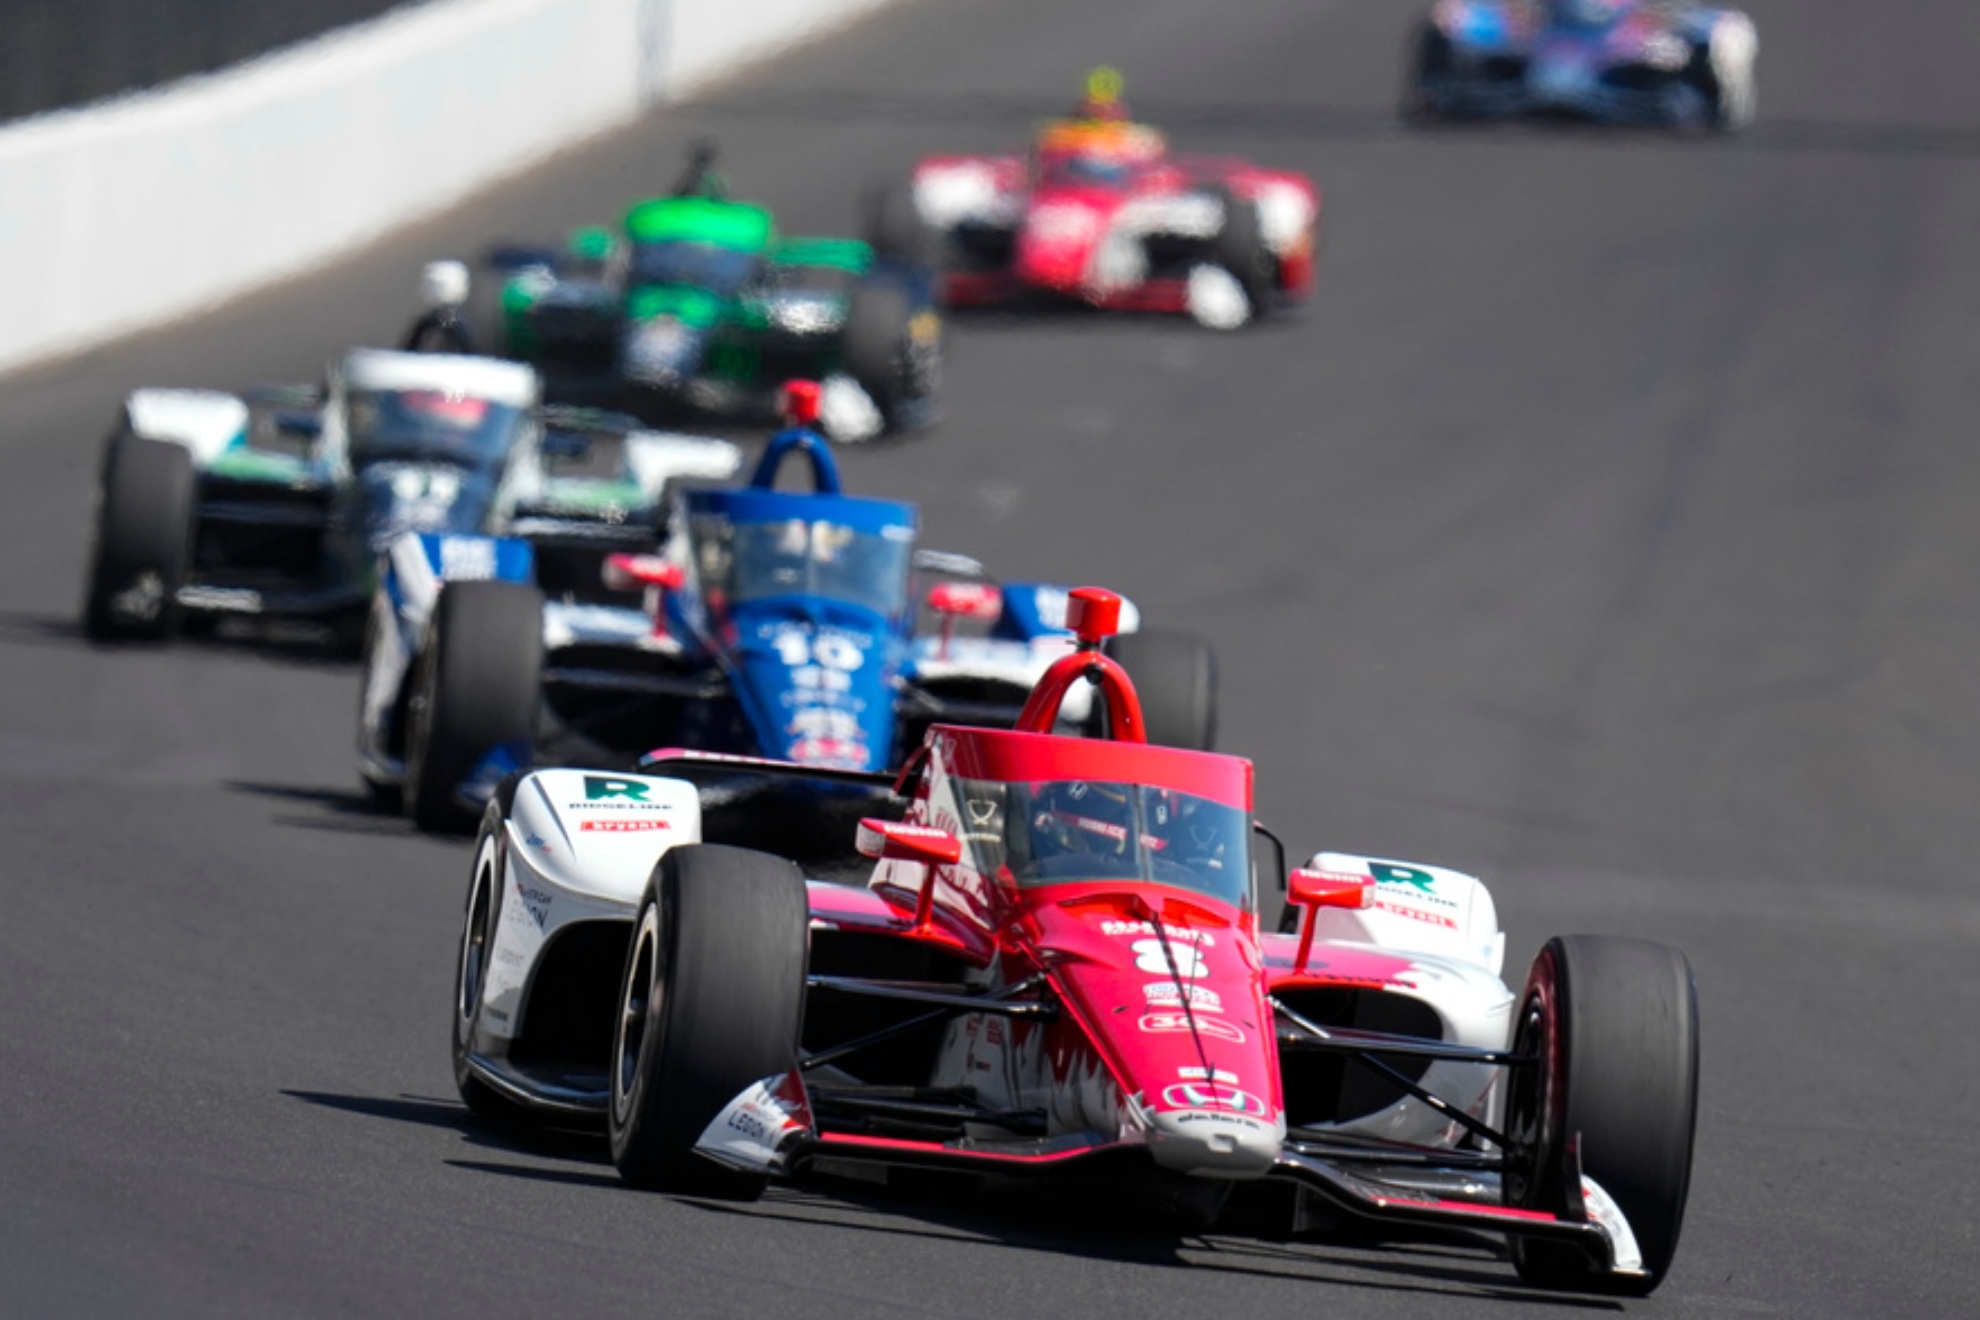 Indianapolis 500 Schedule 2023: Date, Time and more about the race this weekend